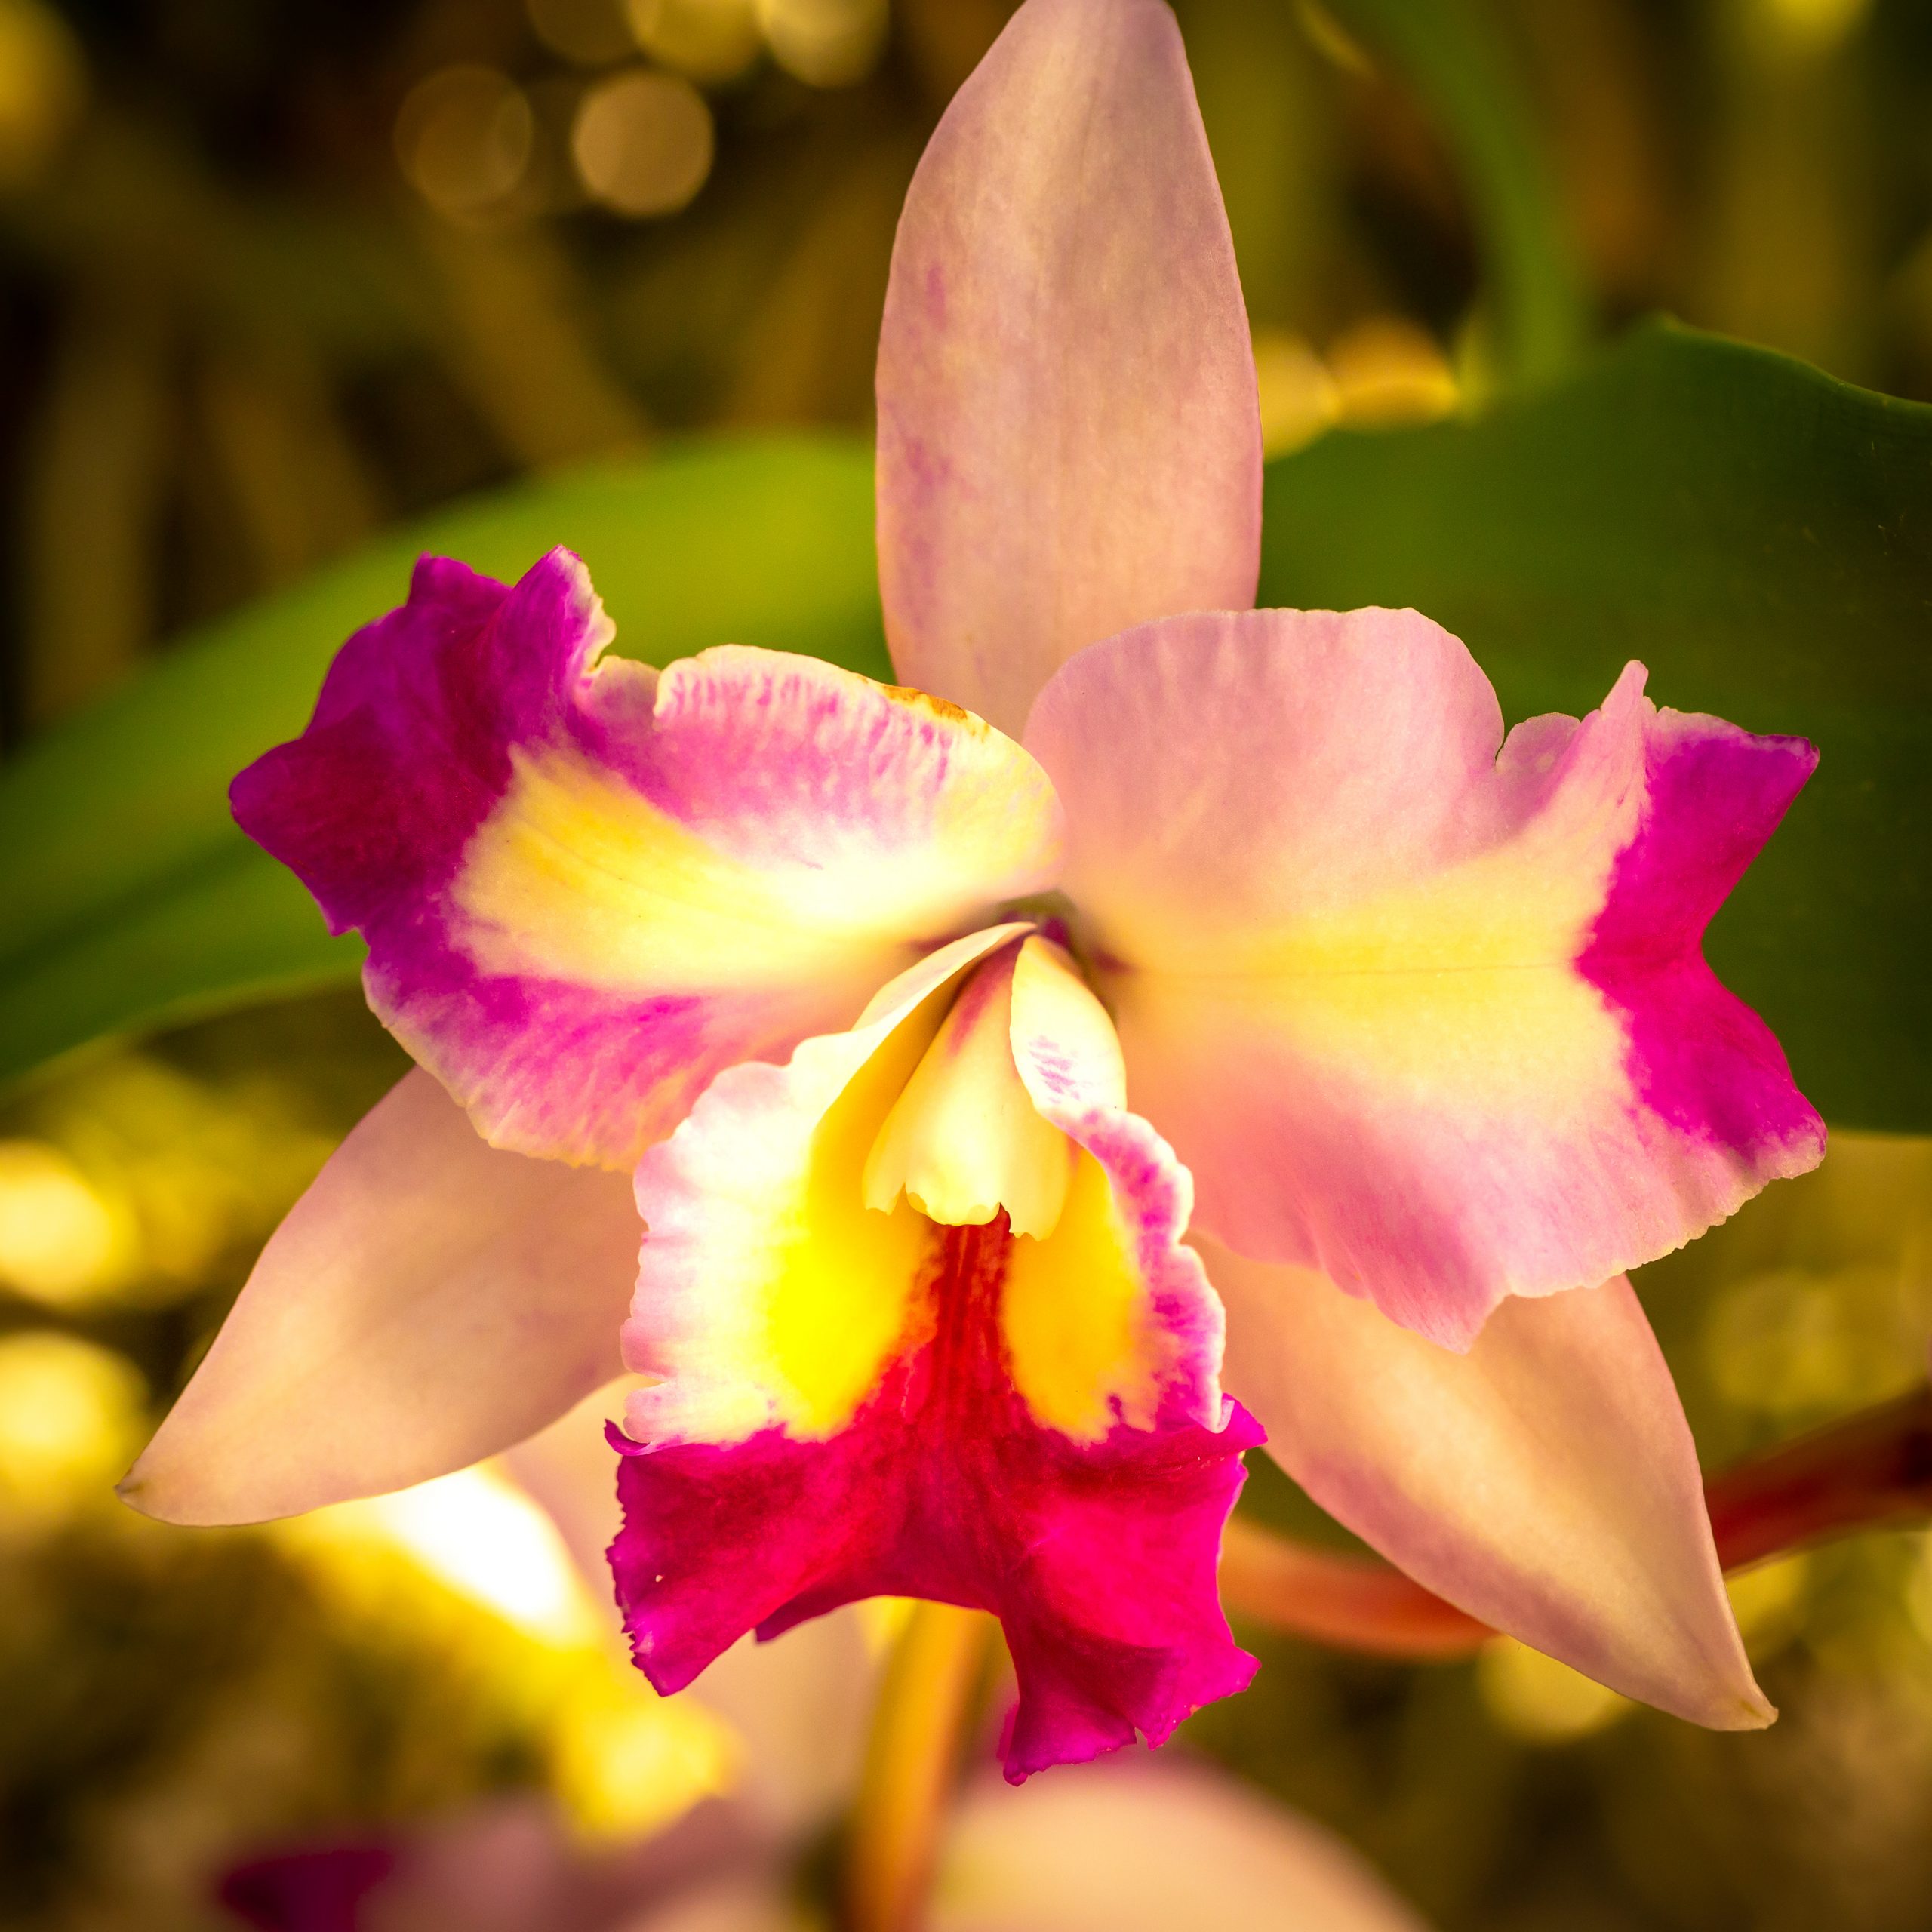 Orchid in pink and peach. Image by Tom Hennessy.